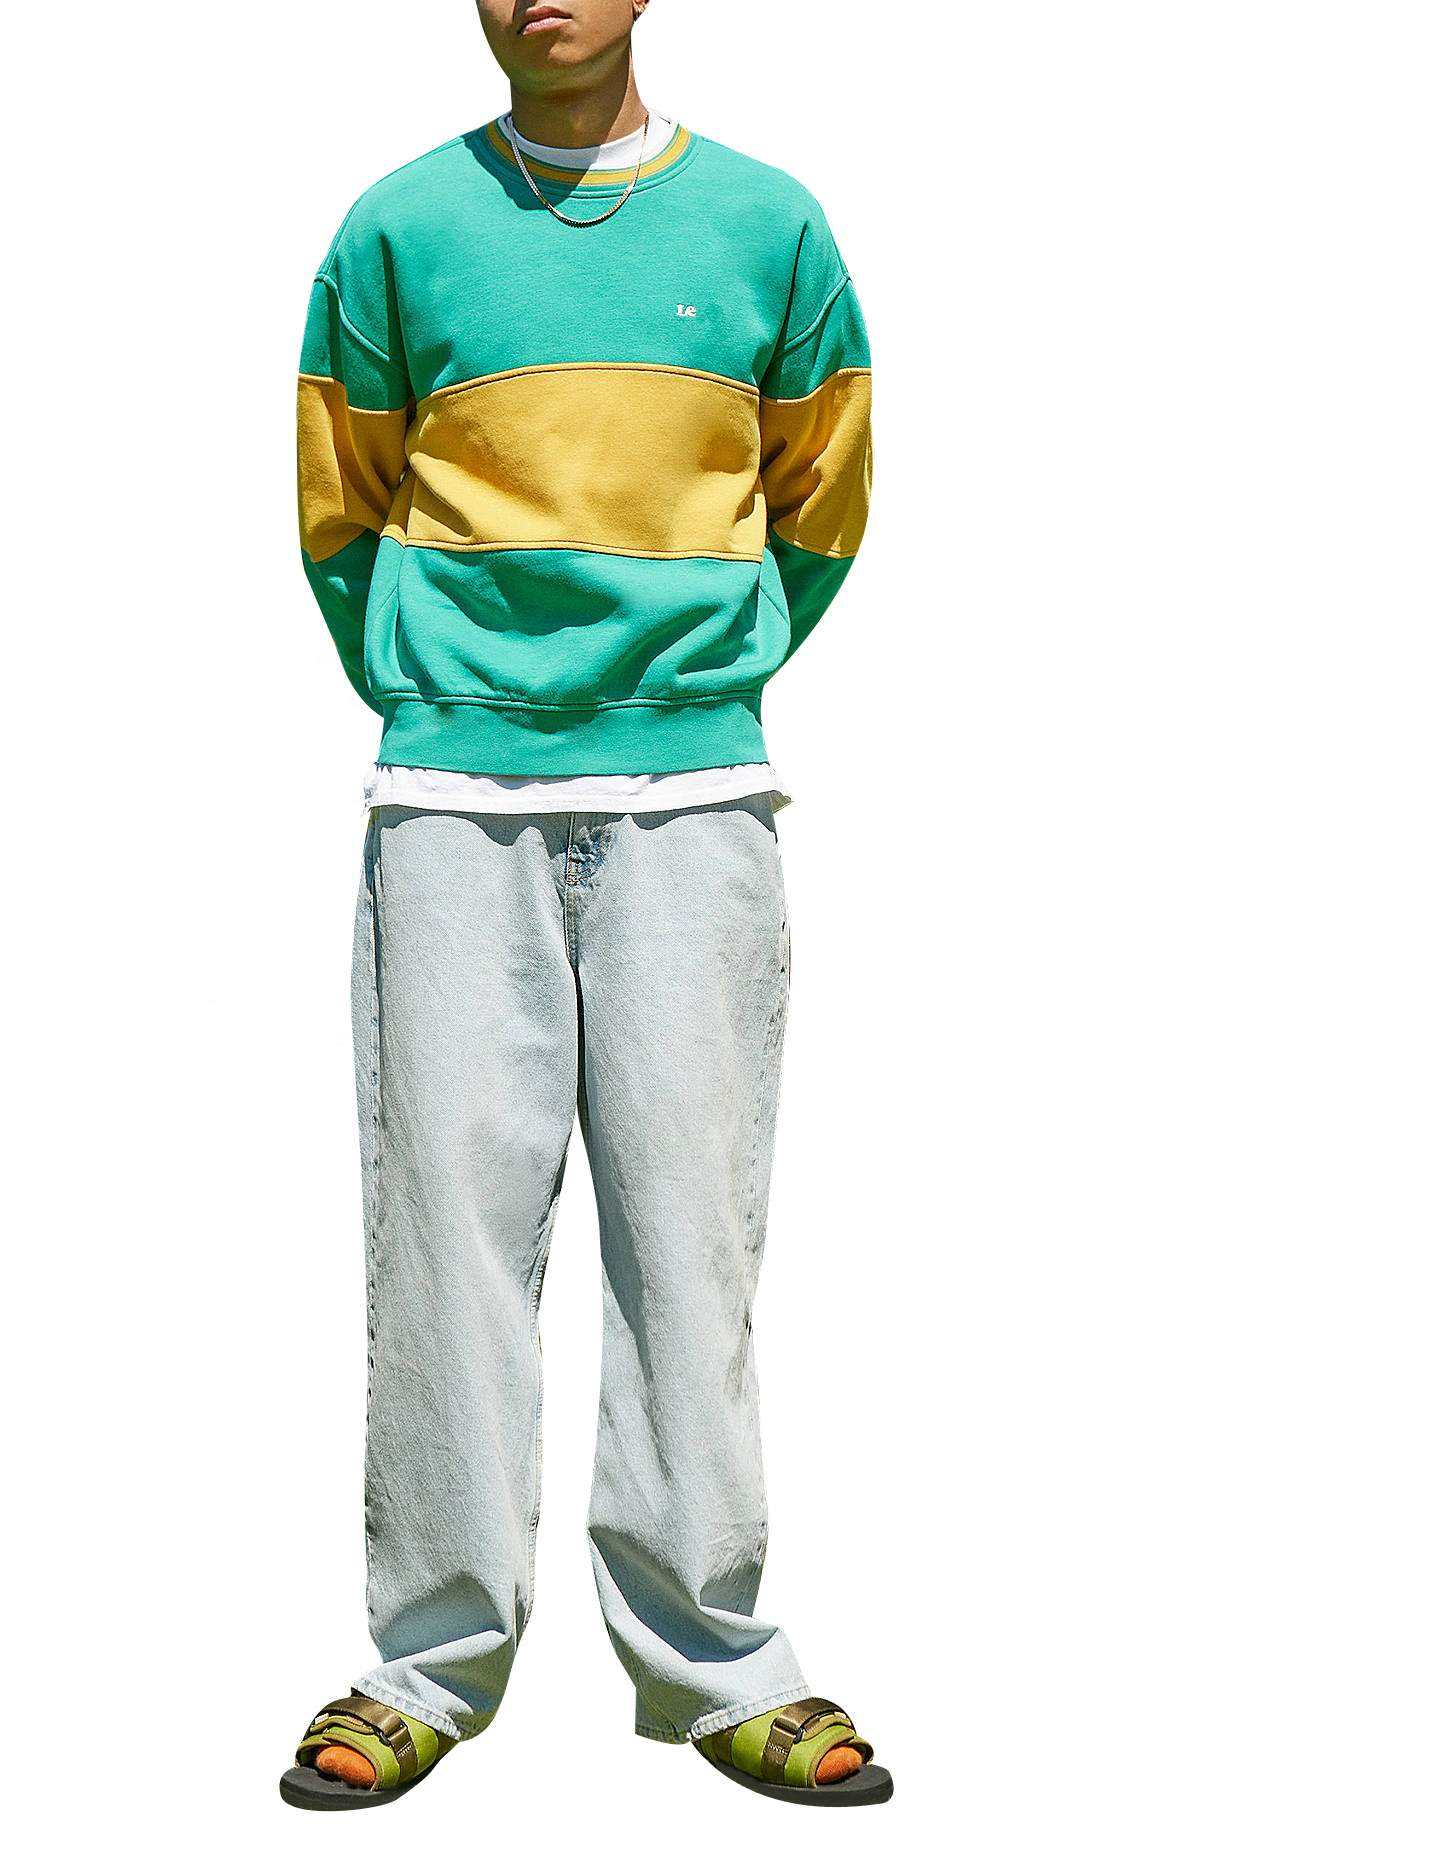 OEM Manufacturer Oversized Heavy Weight Cotton Fleece Crew Neck Pullover Green And Yellow Colorblock Sweatshirts